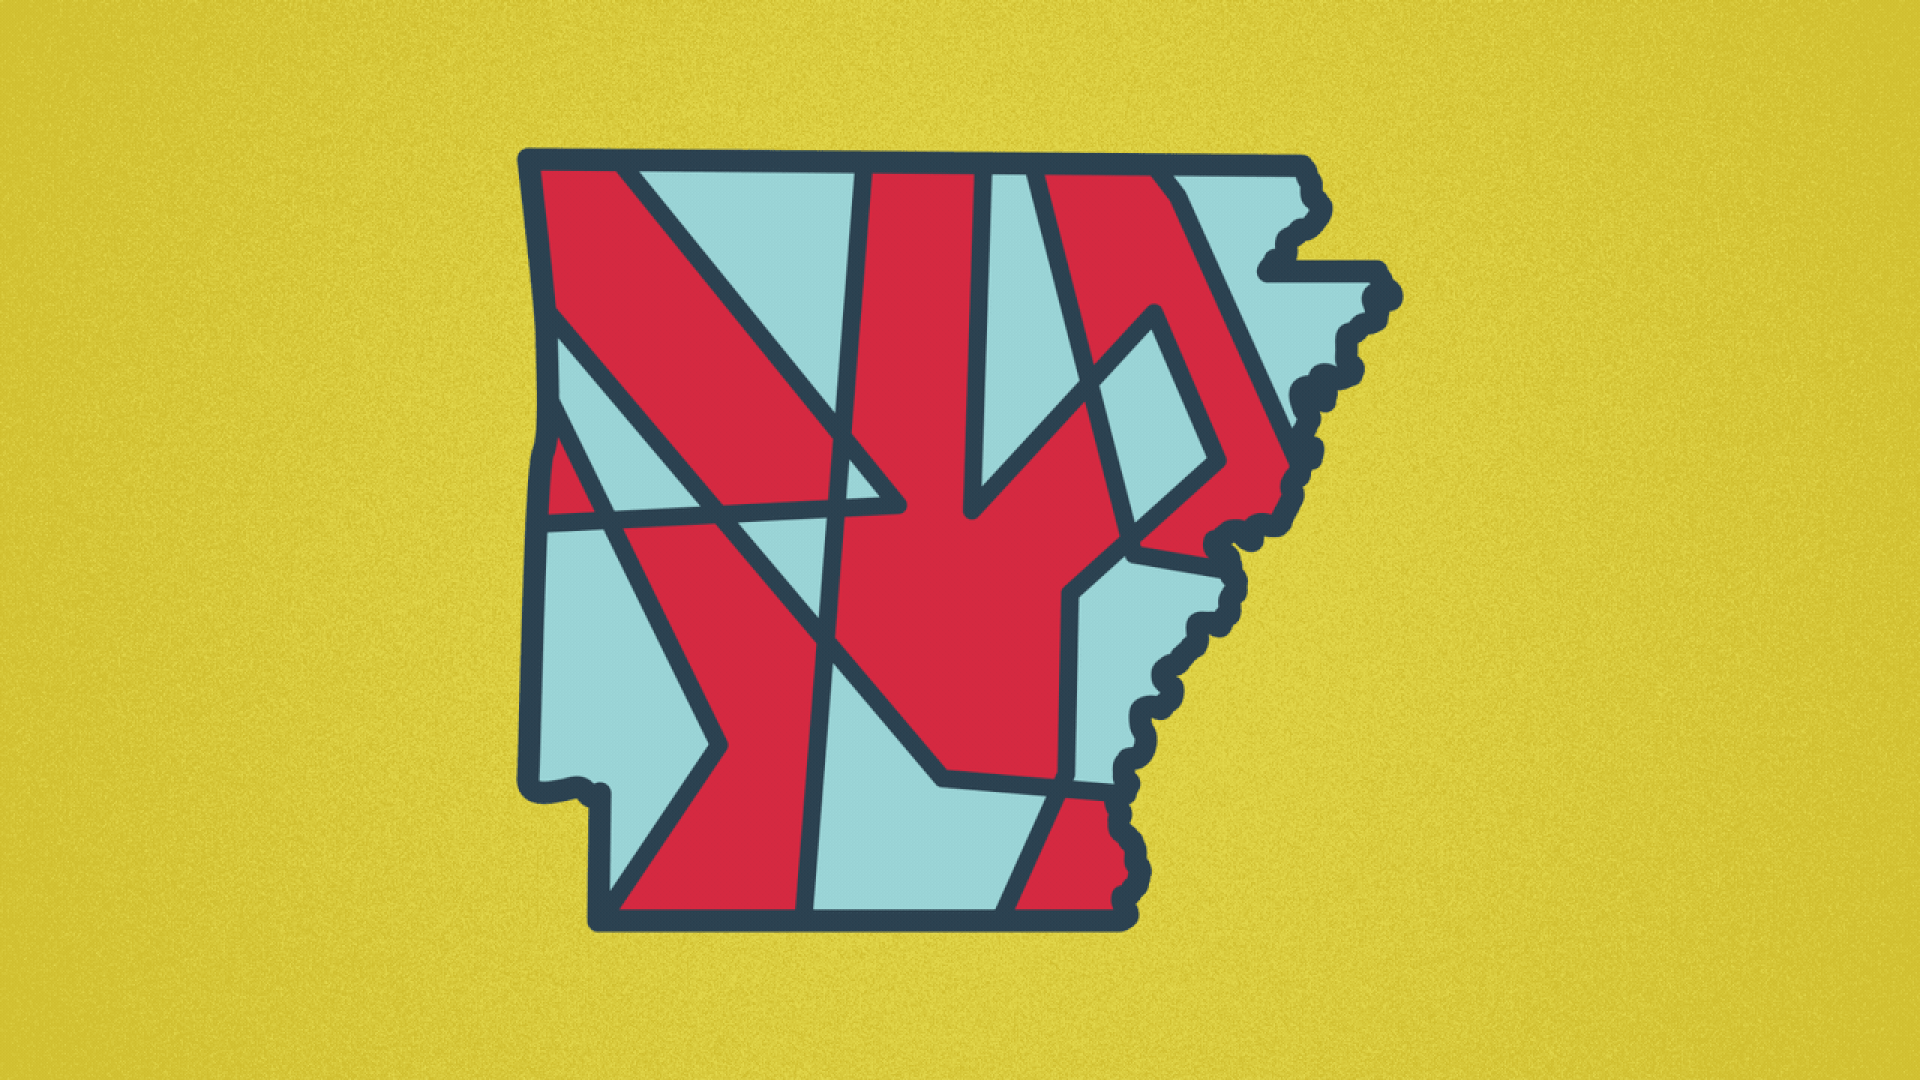 Illustration of the state of Arkansas with moving districts inside it.